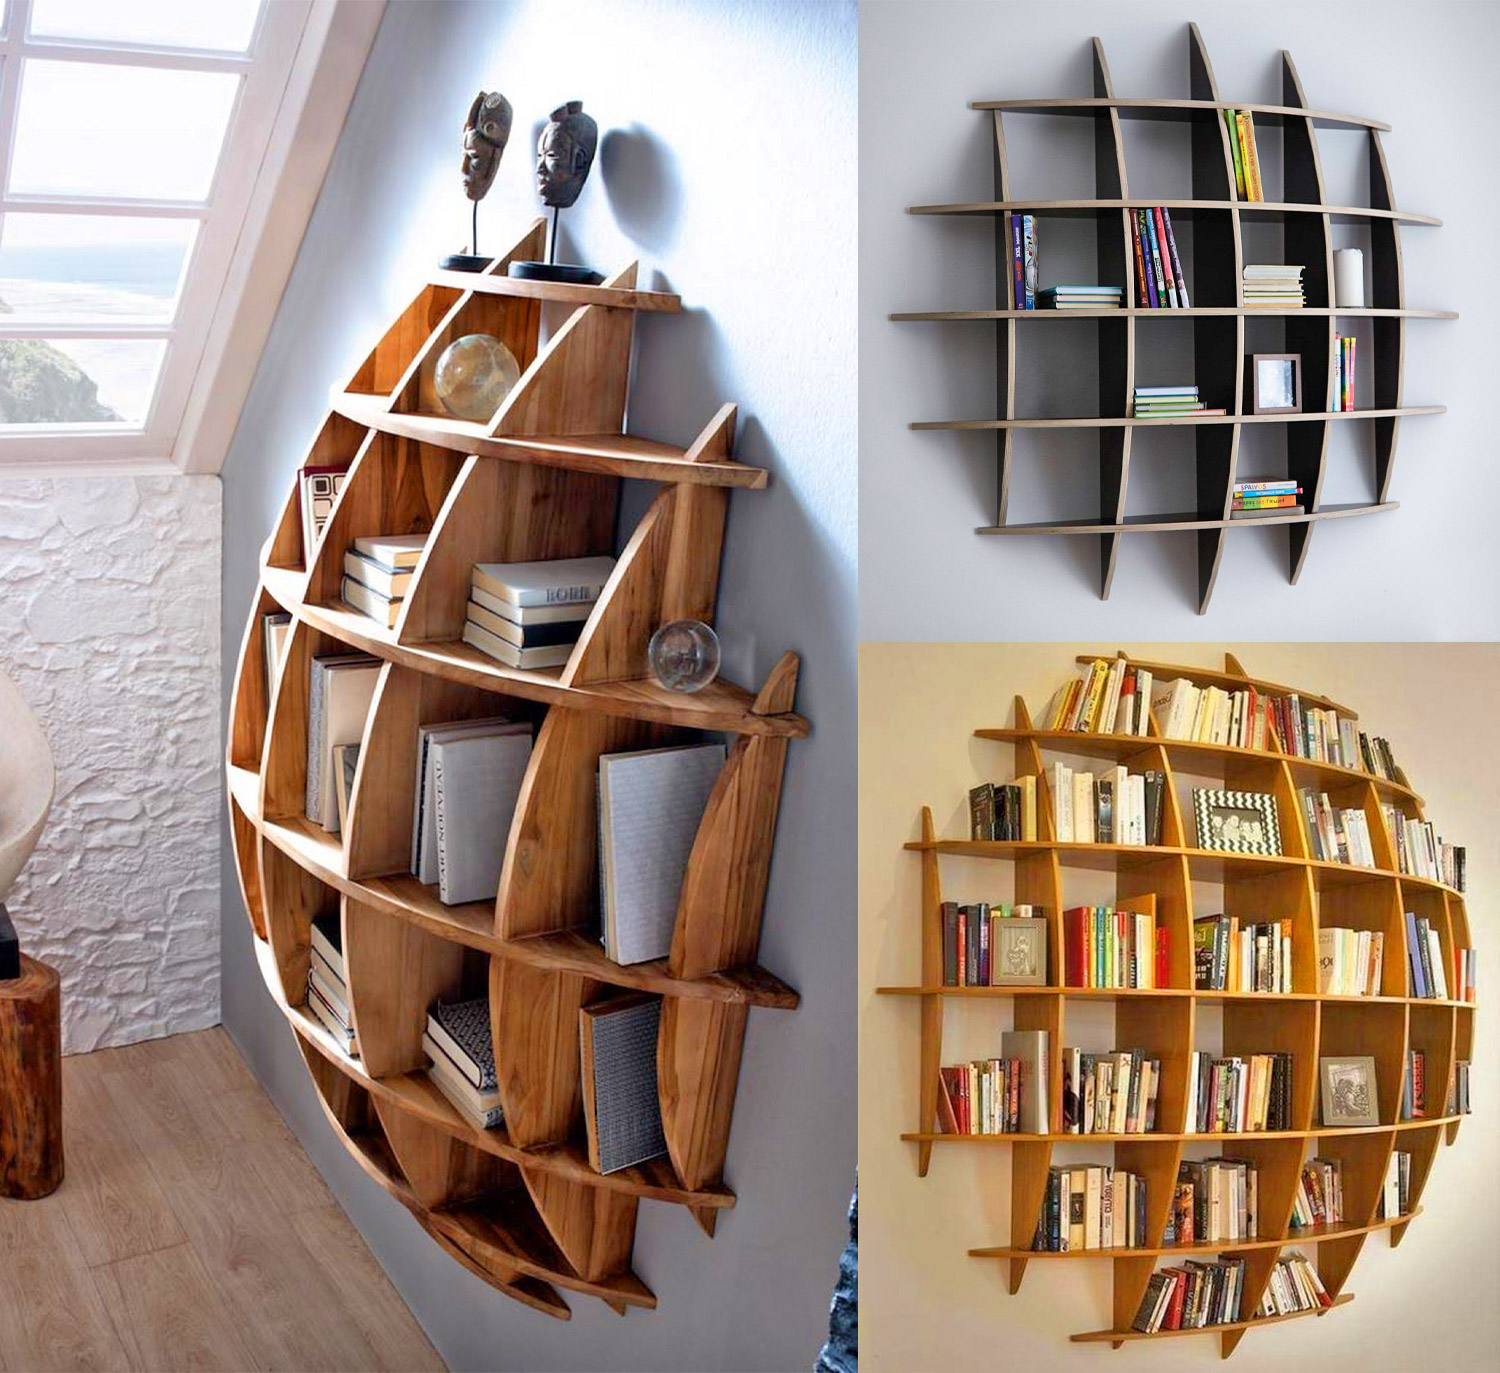 Brown colored wooden sphere shelf Disappearing Into The Wall Bookshelf 